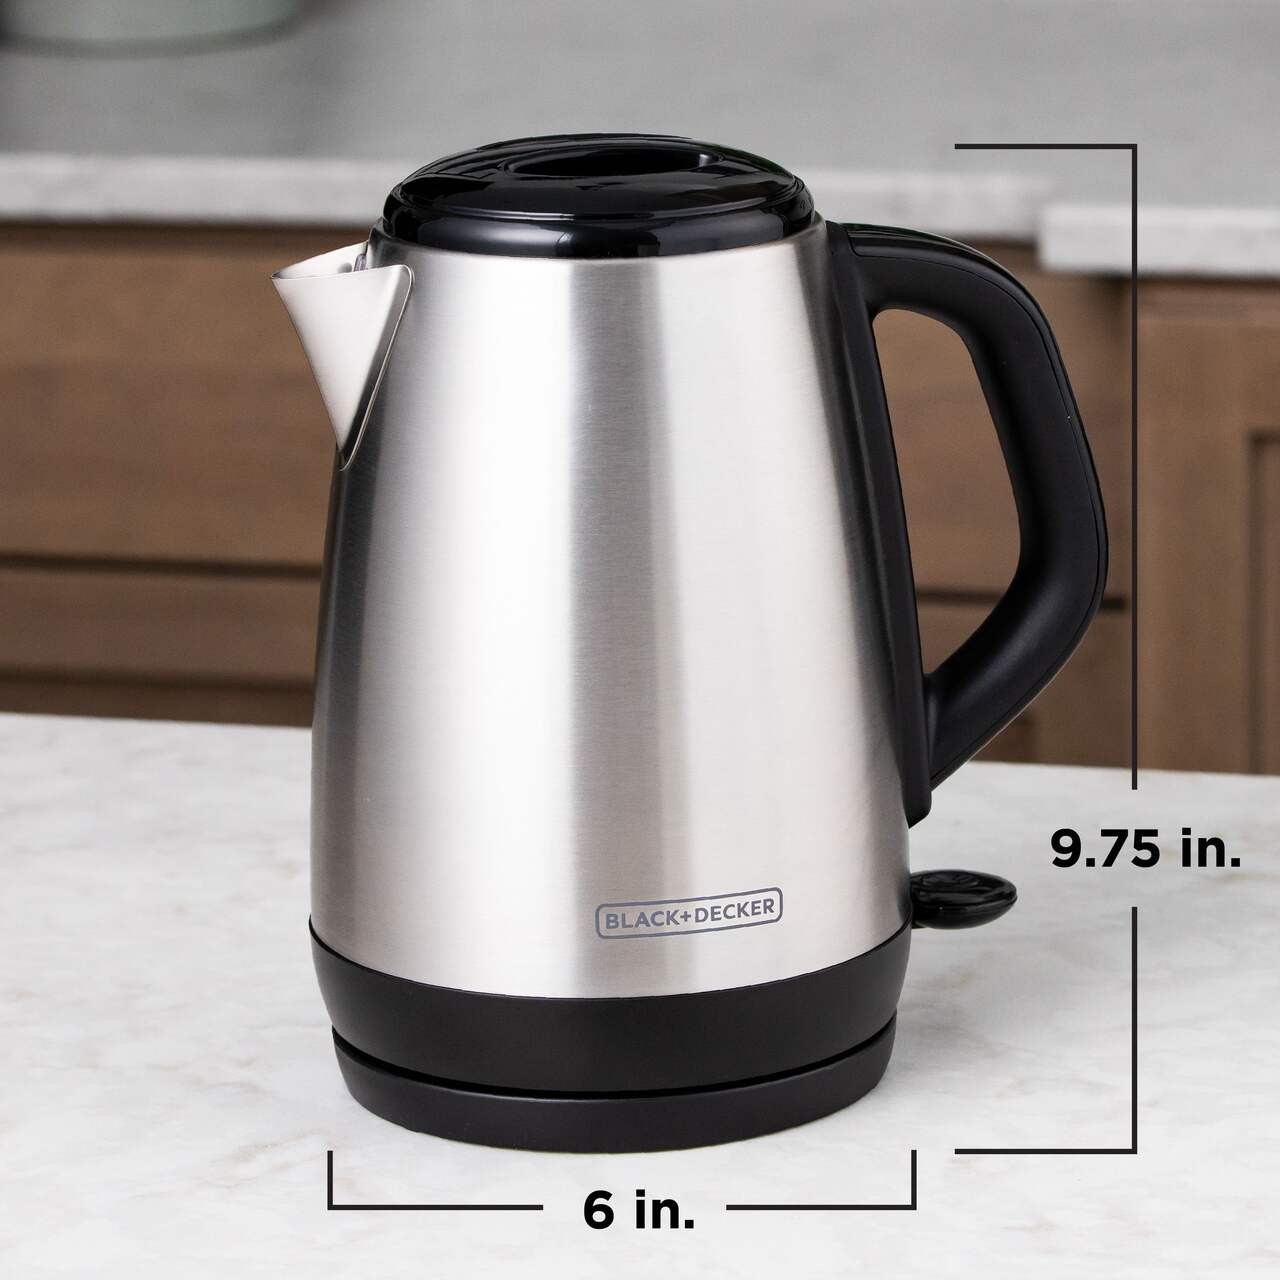 https://media-www.canadiantire.ca/product/living/kitchen/kitchen-appliances/0431027/black-and-decker-stainless-steel-1-7l-kettle-669efedc-dfb9-4c1b-a1ac-7b17f96de1e0-jpgrendition.jpg?imdensity=1&imwidth=1244&impolicy=mZoom